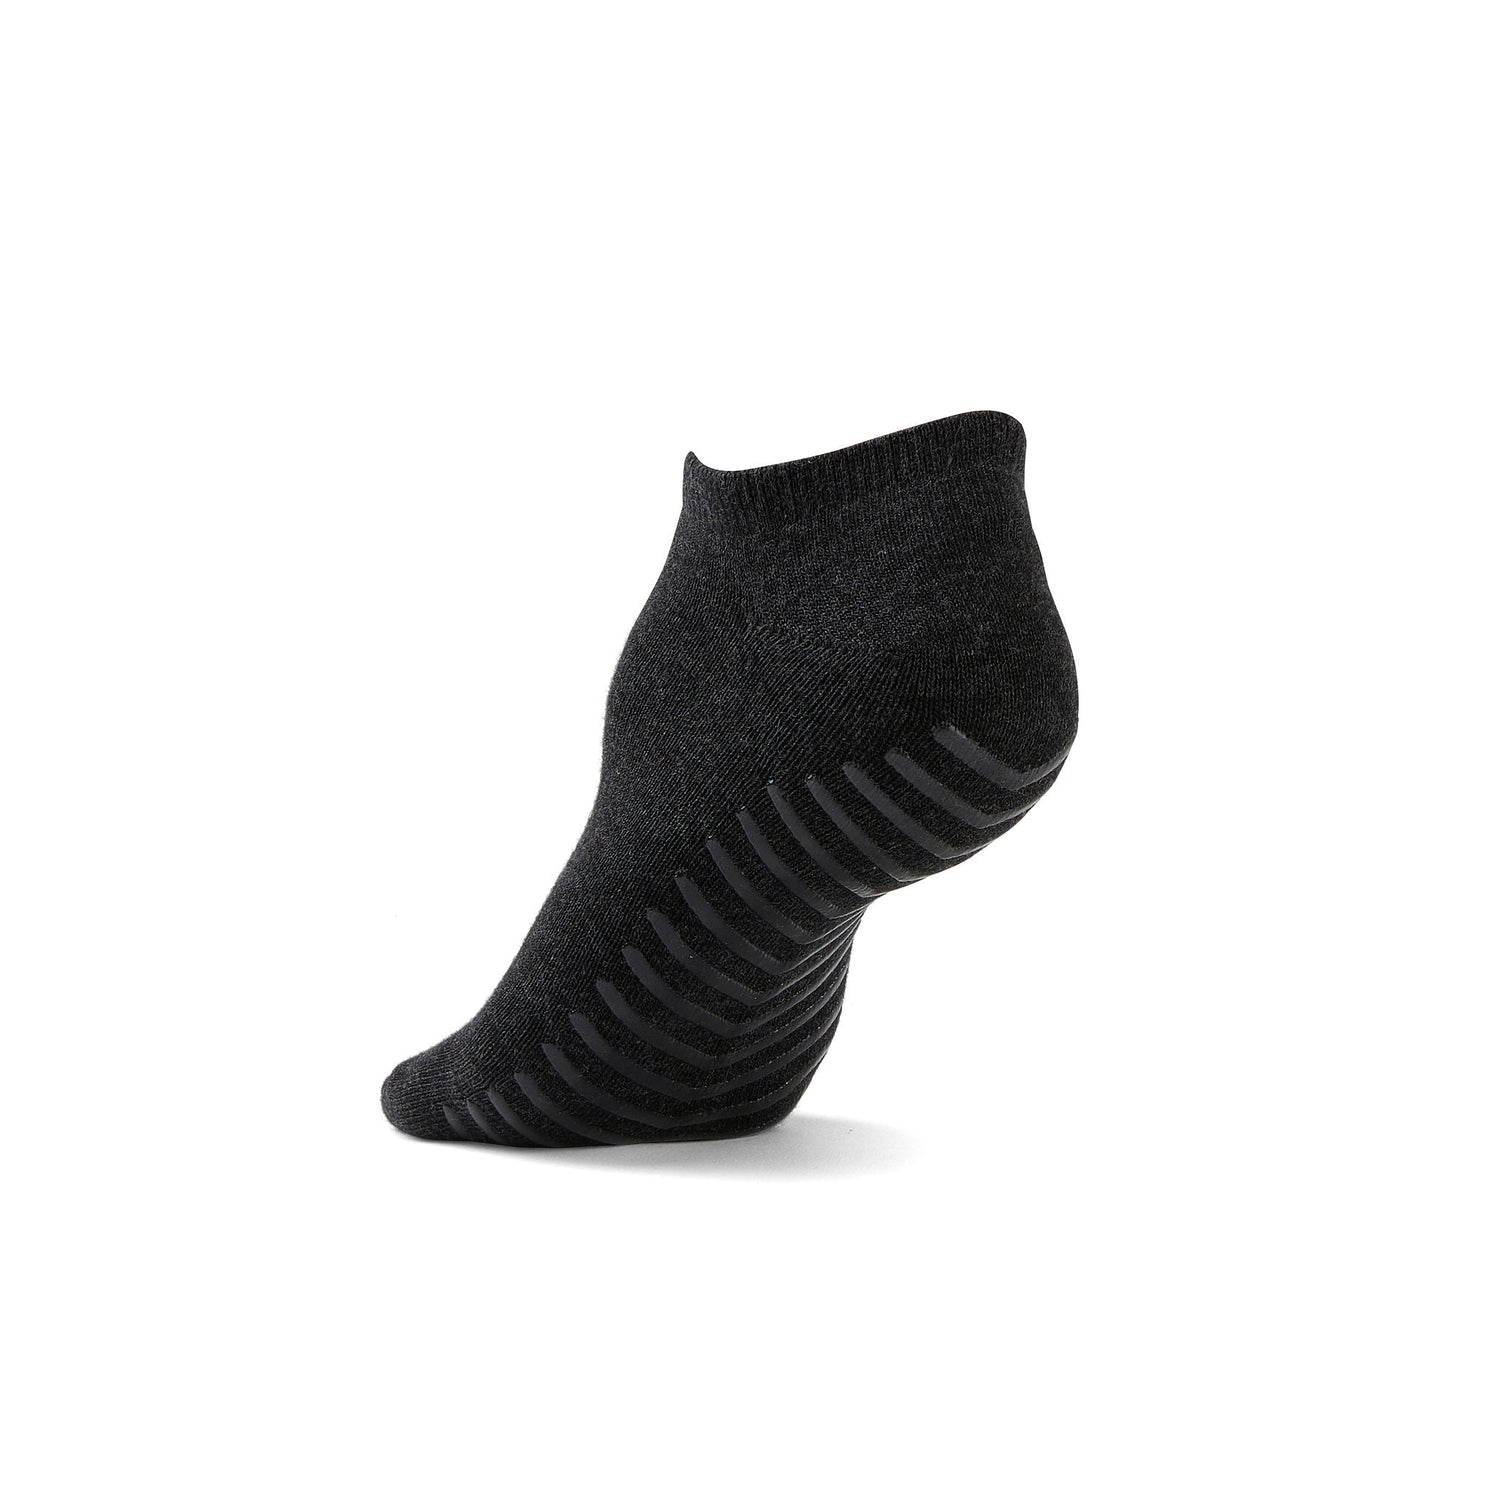 Dark grey anti slip ankle socks made of ultra soft cotton with sticky grips.